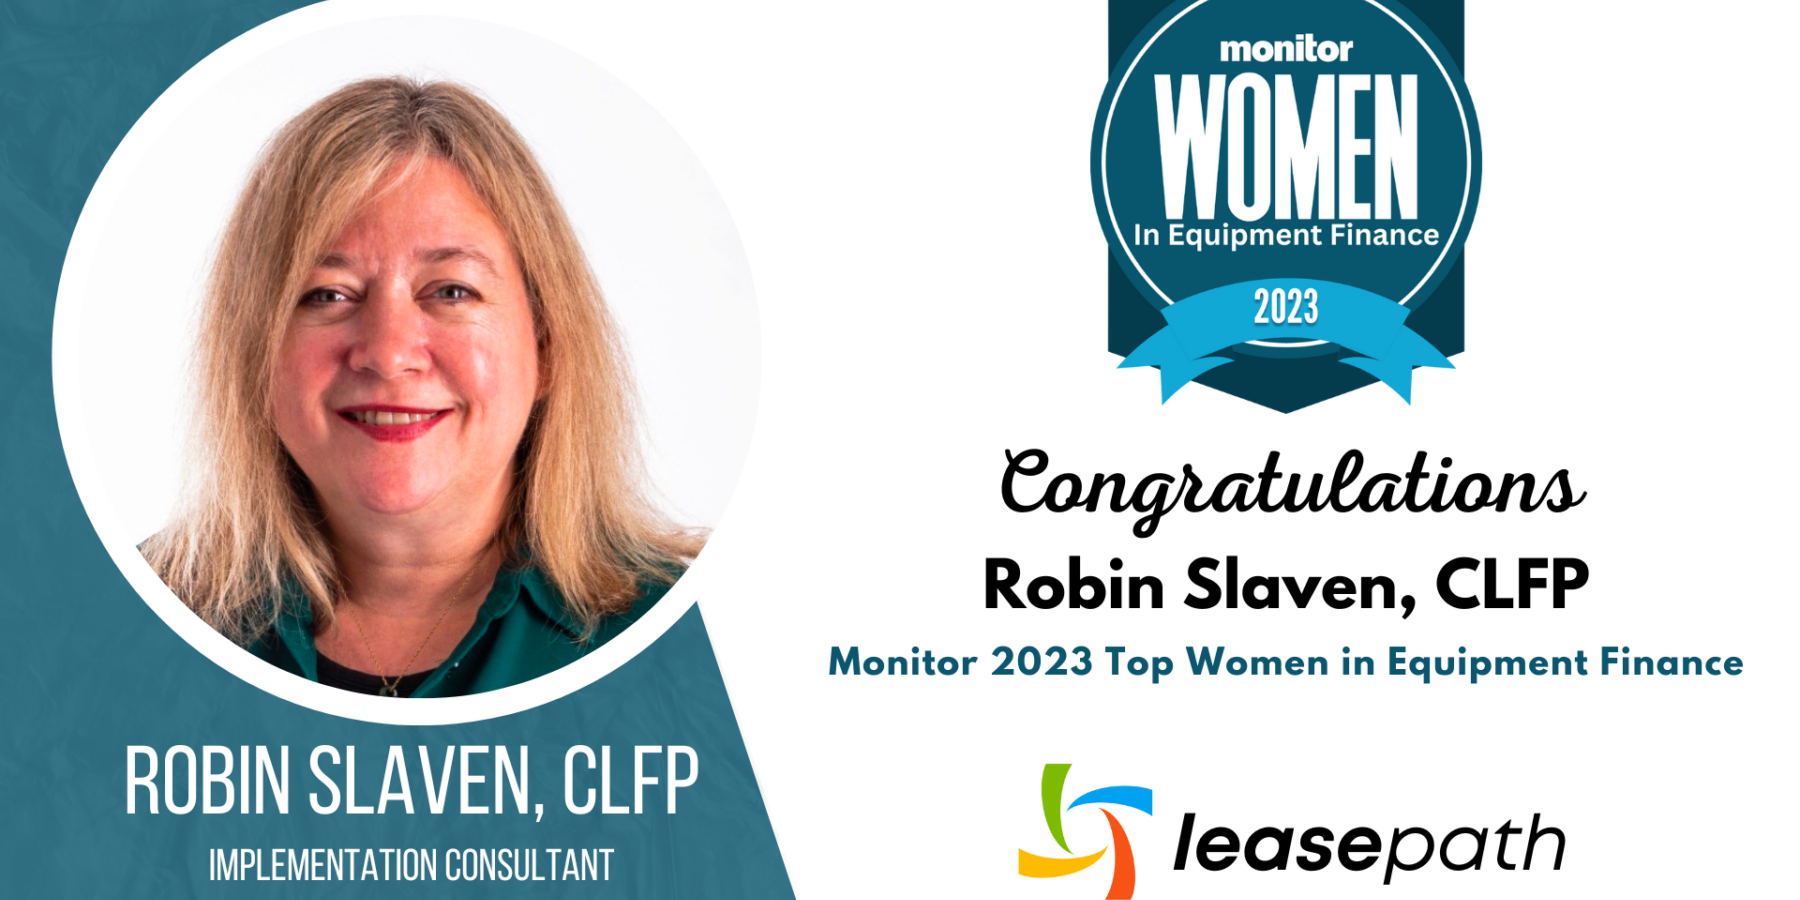 Monitor 2023 Top Women in Equipment Finance, Robin Slaven, CLFP, Implementation Consultant, Leasepath